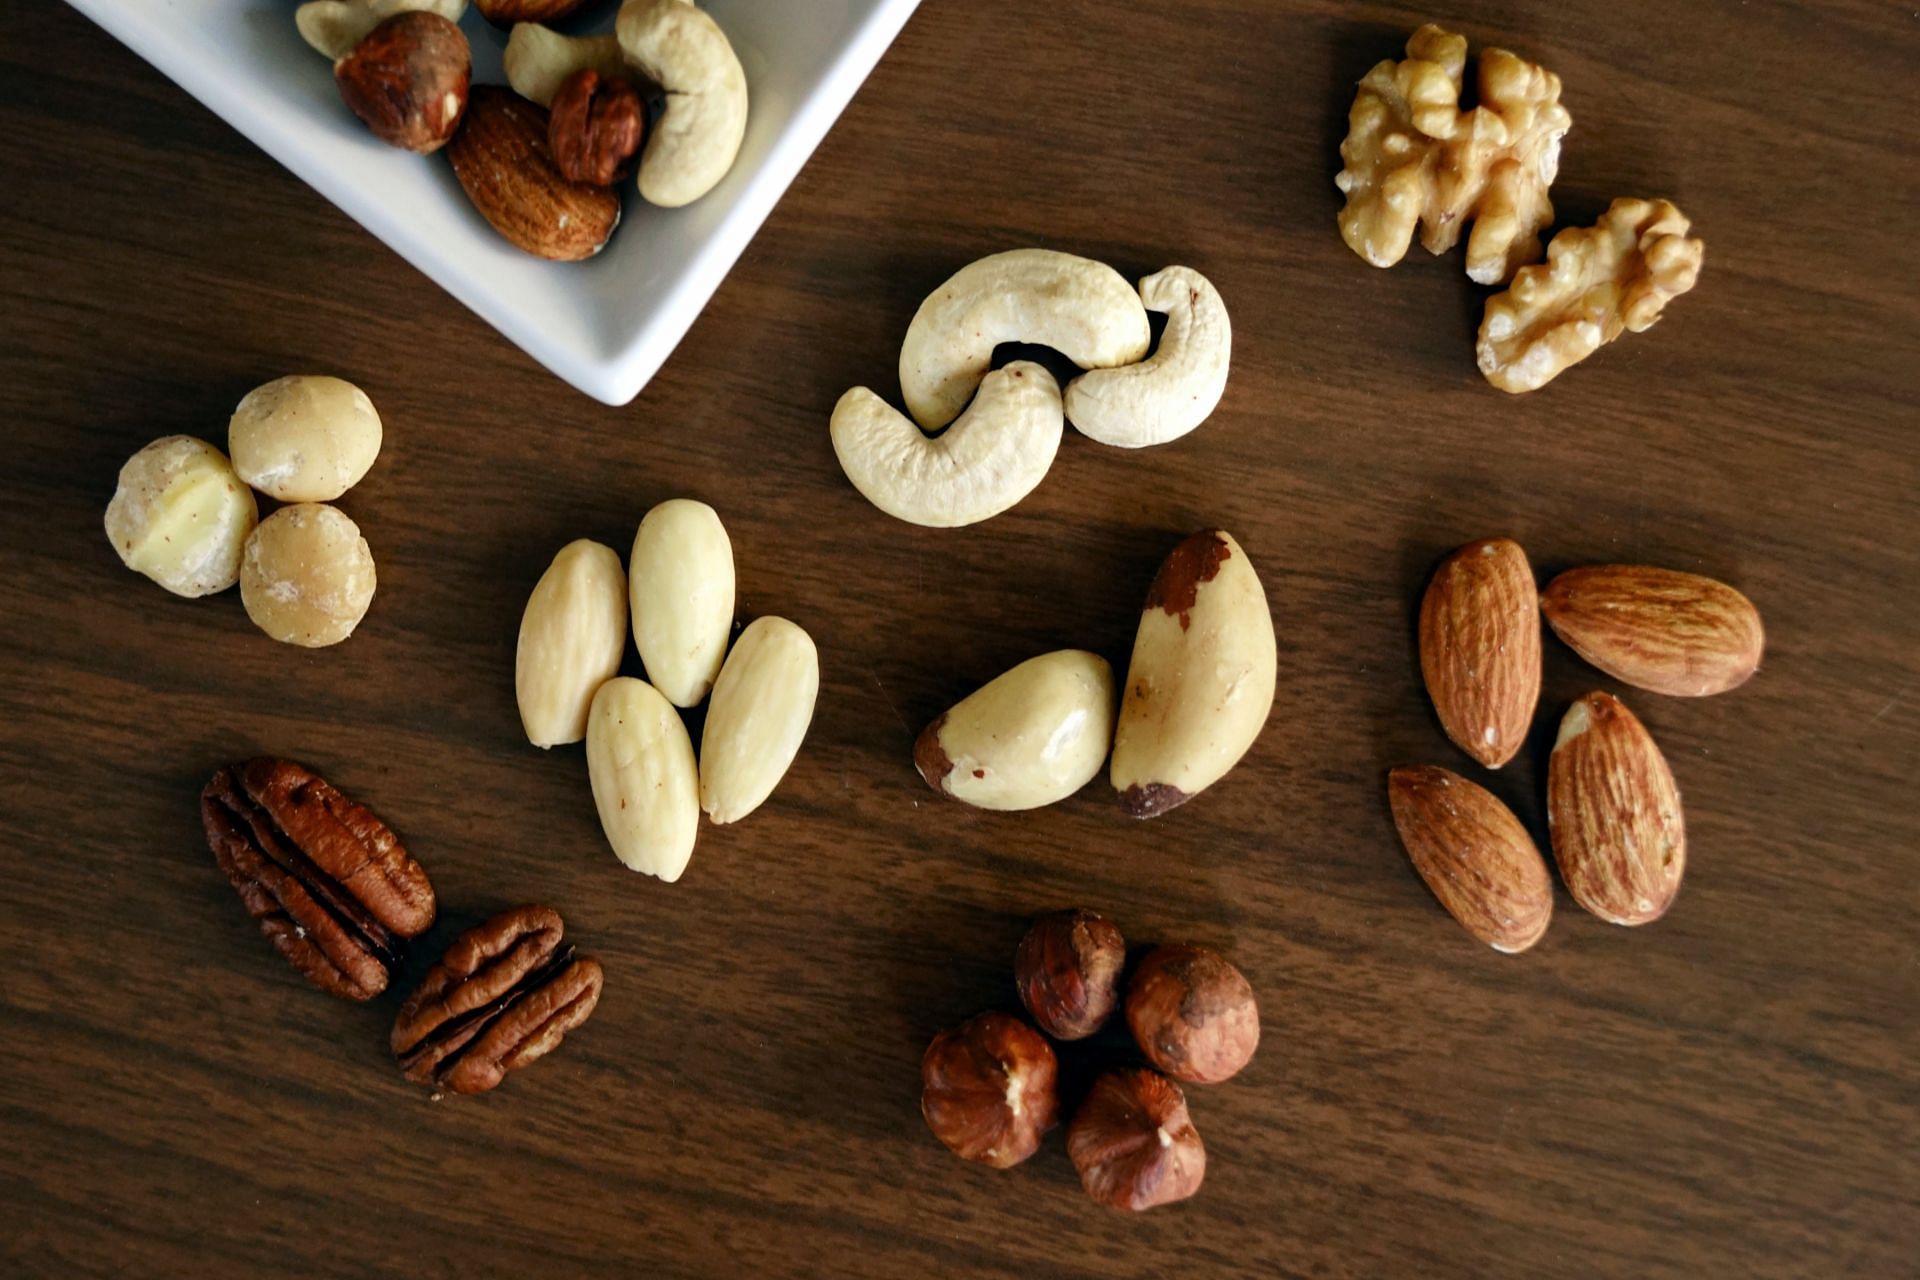 Almond for weight loss with PCOS (image sourced via Pexels / Photo by Marta)